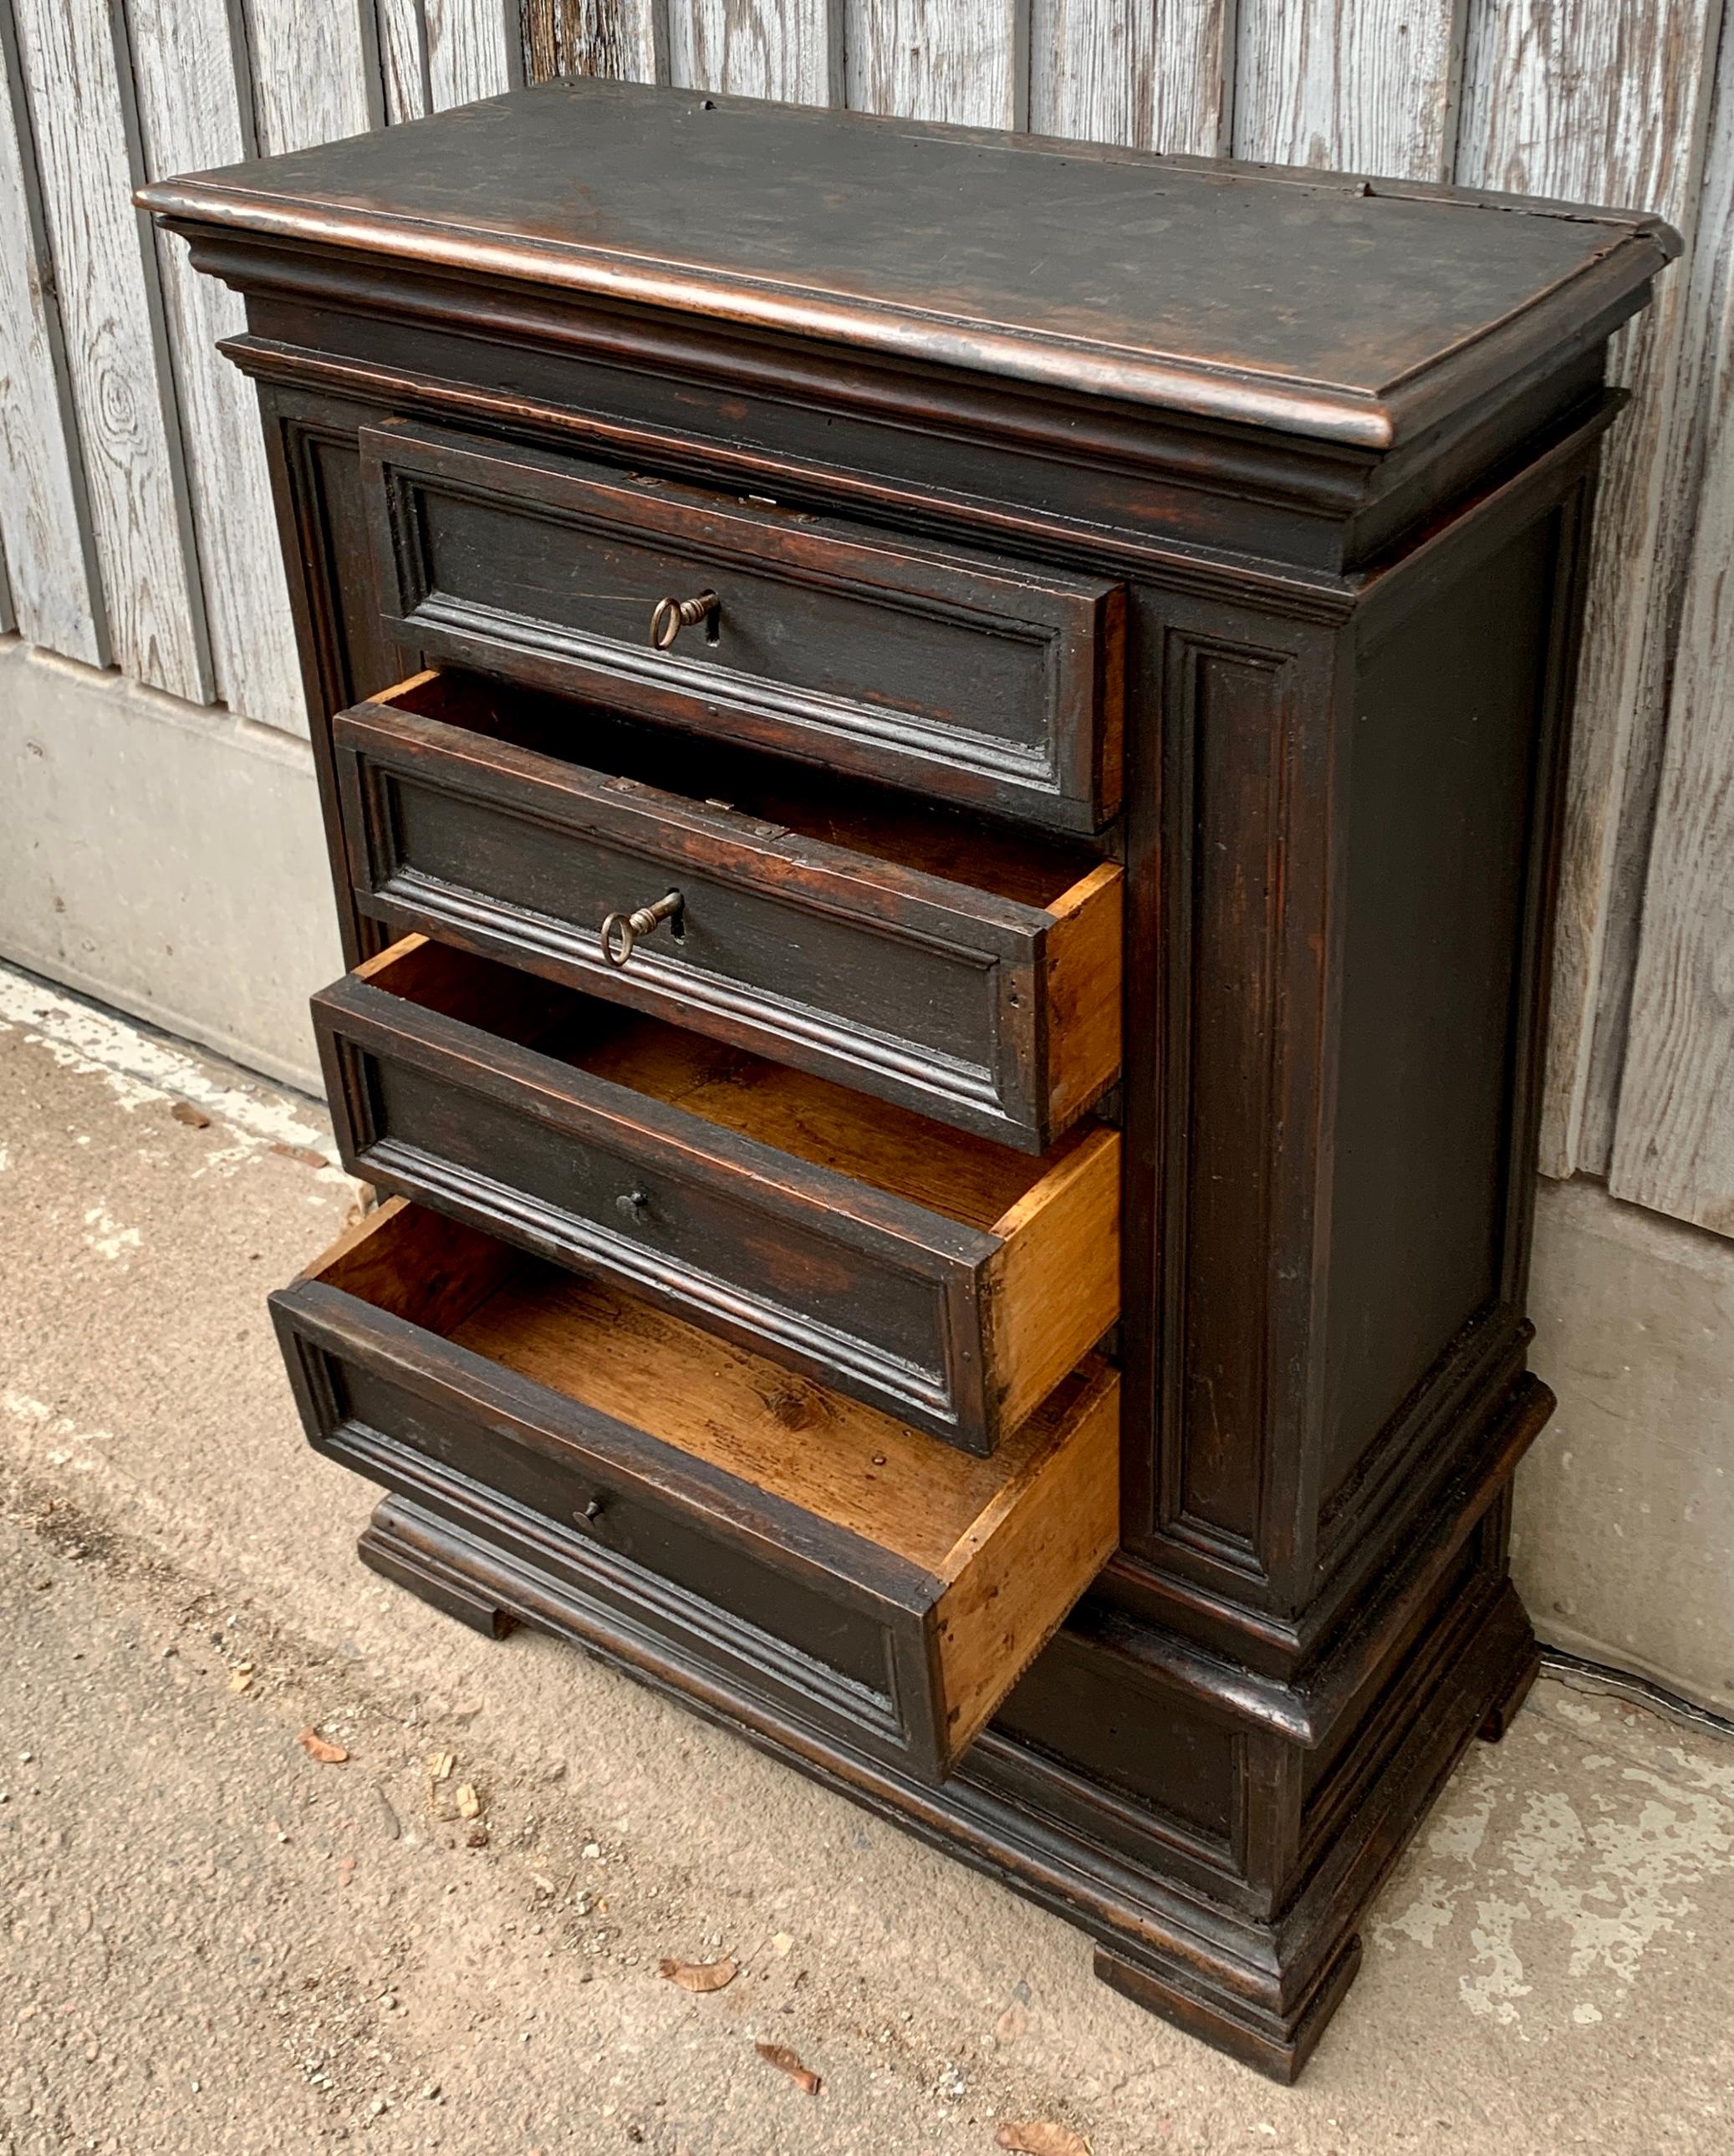 18th Century English Small Chest of Drawers Nightstand In Good Condition For Sale In Haddonfield, NJ